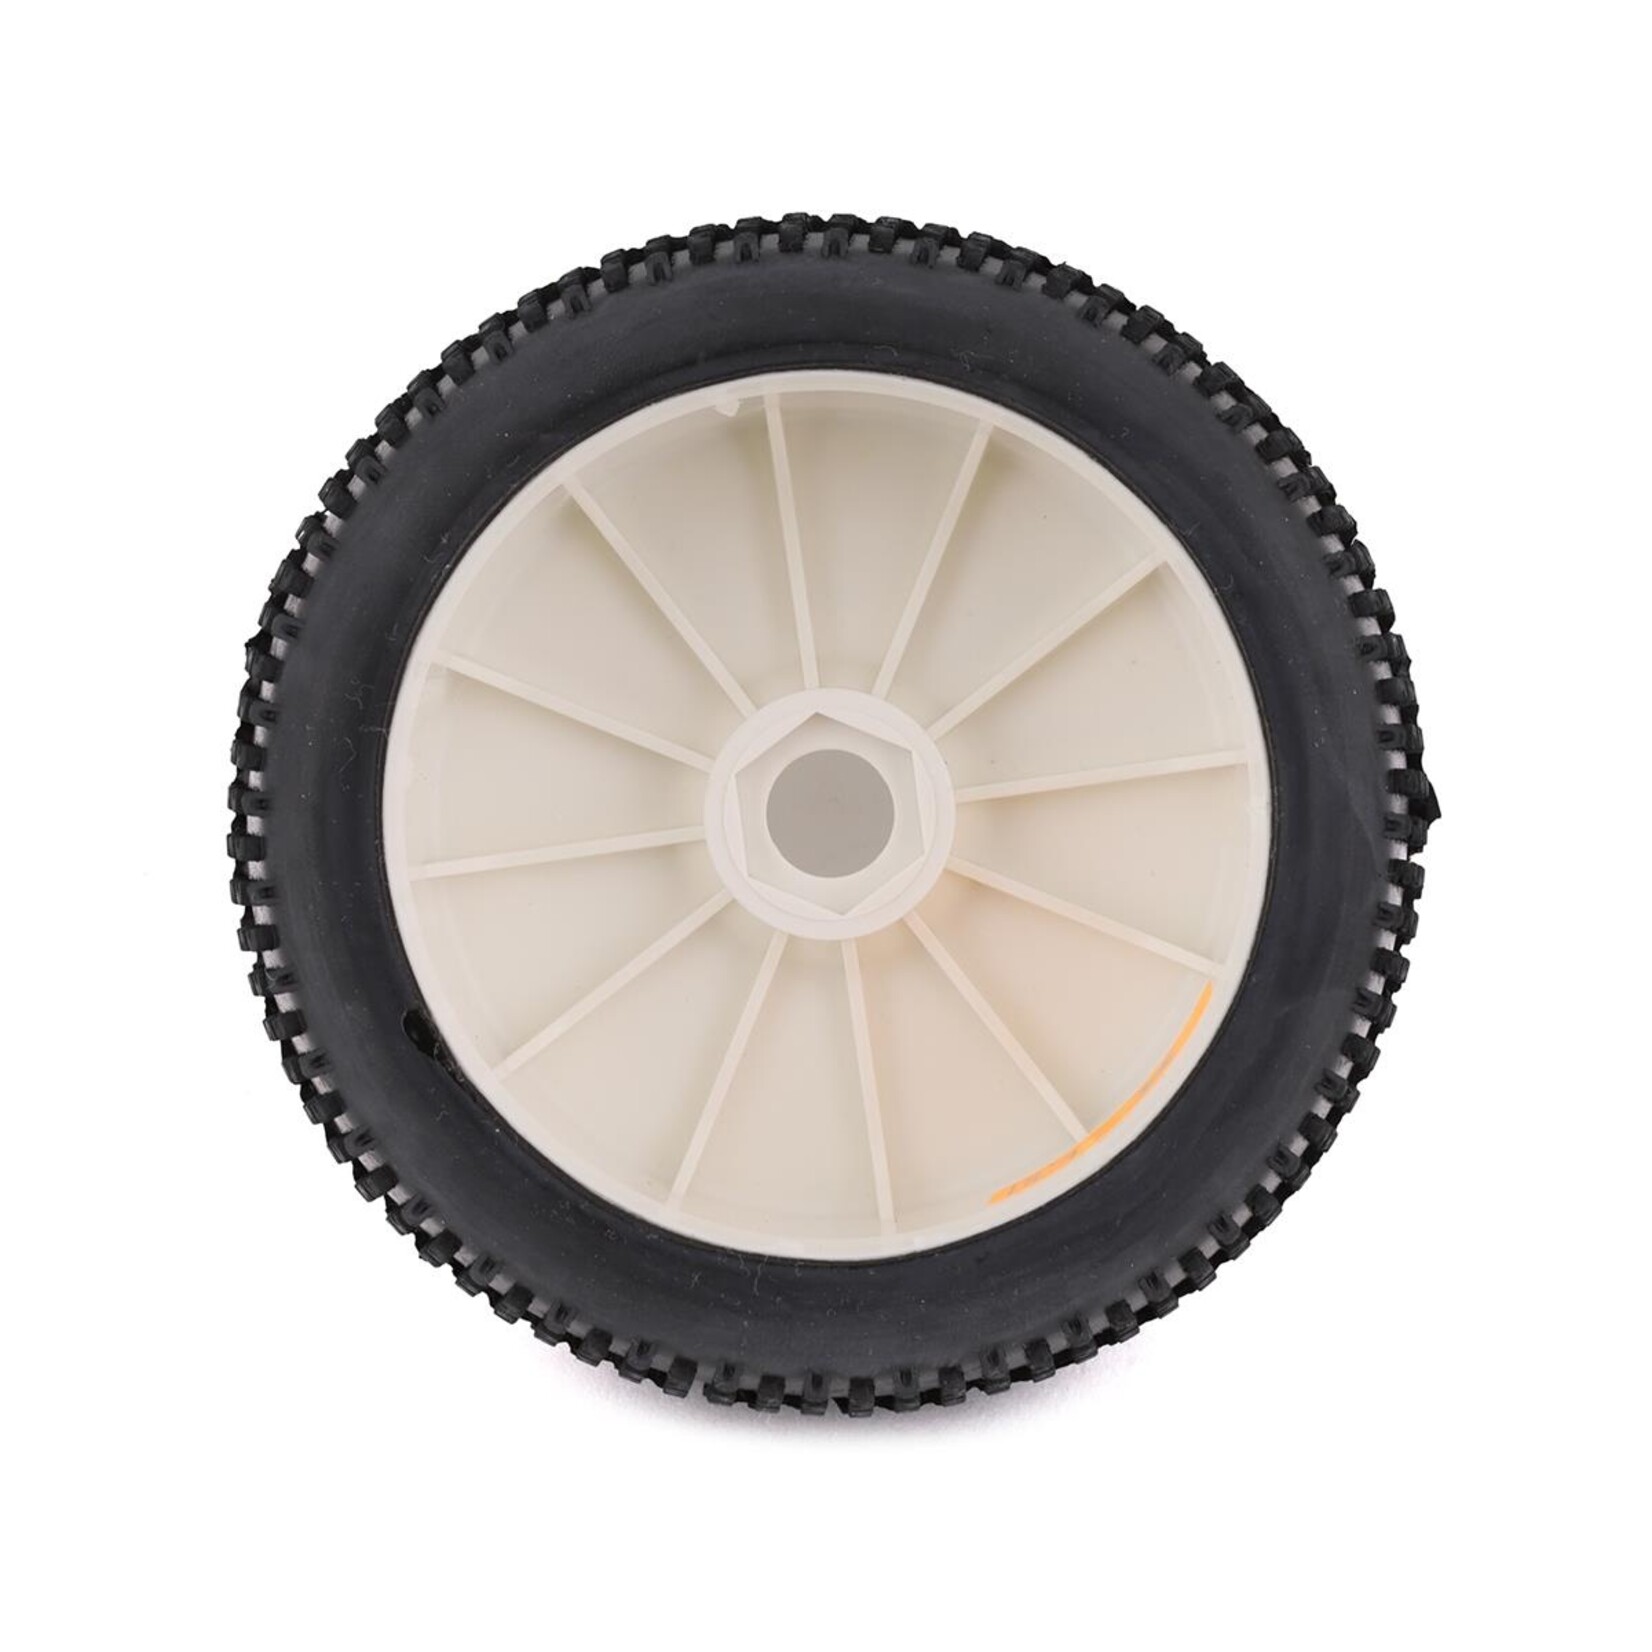 GRP GRP Easy Pre-Mounted 1/8 Buggy Tires (2) (White) (Extra Soft) #GBX07X